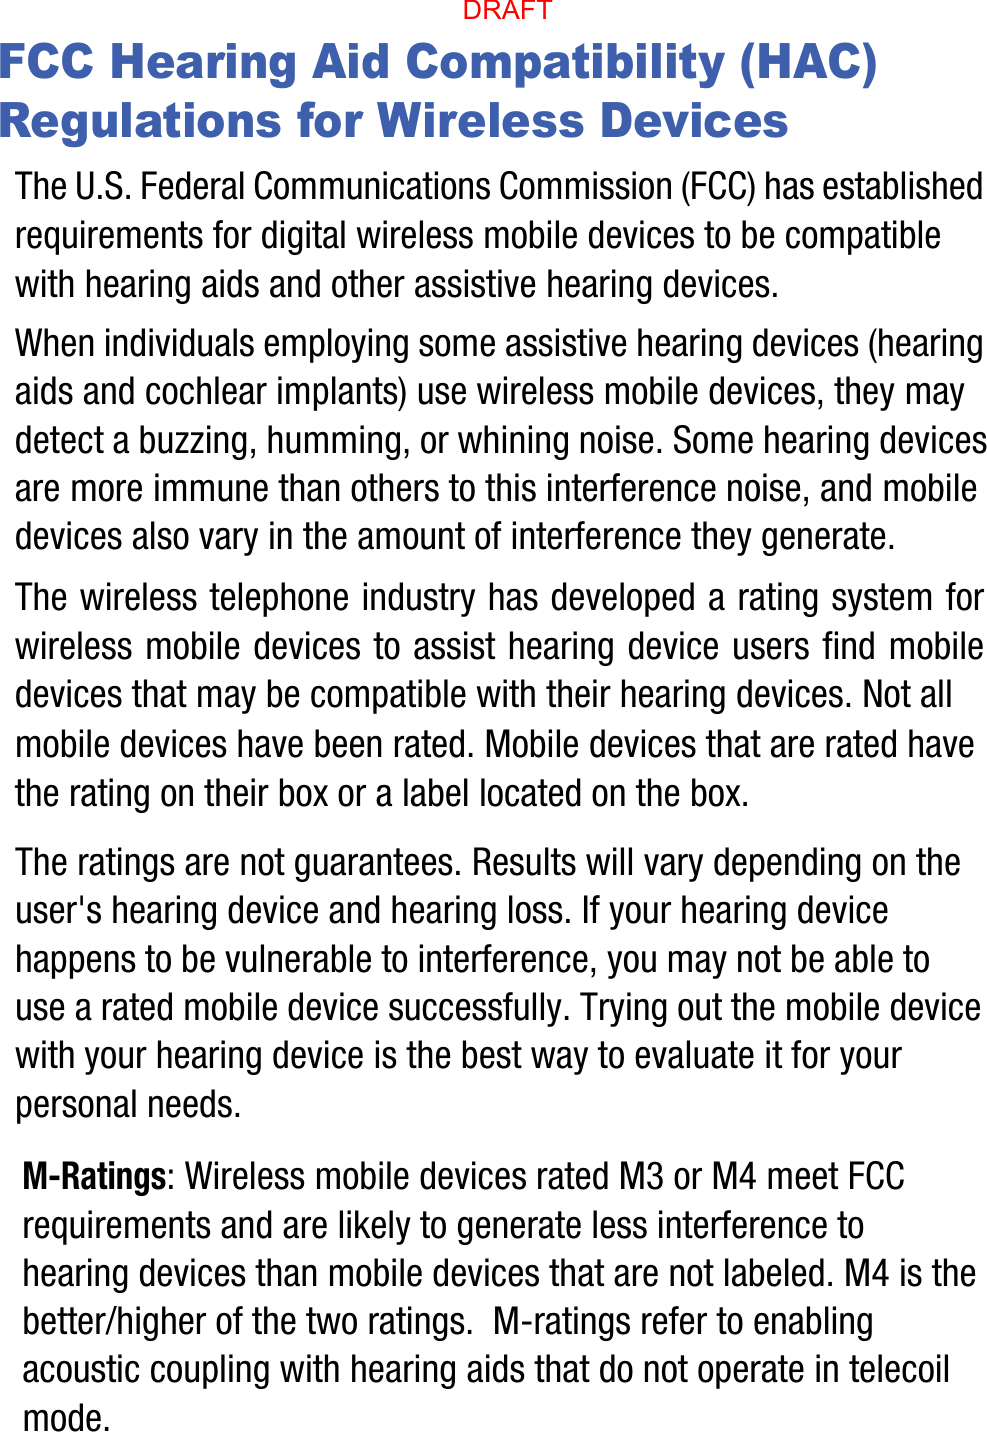 FCC Hearing Aid Compatibility (HAC) Regulations for Wireless DevicesThe U.S. Federal Communications Commission (FCC) has established requirements for digital wireless mobile devices to be compatible with hearing aids and other assistive hearing devices.When individuals employing some assistive hearing devices (hearing aids and cochlear implants) use wireless mobile devices, they may detect a buzzing, humming, or whining noise. Some hearing devices are more immune than others to this interference noise, and mobile devices also vary in the amount of interference they generate.The wireless telephone industry has developed a rating system for wireless mobile devices to assist hearing device users find mobile devices that may be compatible with their hearing devices. Not all mobile devices have been rated. Mobile devices that are rated have the rating on their box or a label located on the box.The ratings are not guarantees. Results will vary depending on the user&apos;s hearing device and hearing loss. If your hearing device happens to be vulnerable to interference, you may not be able to use a rated mobile device successfully. Trying out the mobile device with your hearing device is the best way to evaluate it for your personal needs.M-Ratings: Wireless mobile devices rated M3 or M4 meet FCC requirements and are likely to generate less interference to hearing devices than mobile devices that are not labeled. M4 is the better/higher of the two ratings.  M-ratings refer to enabling acoustic coupling with hearing aids that do not operate in telecoil mode.DRAFT